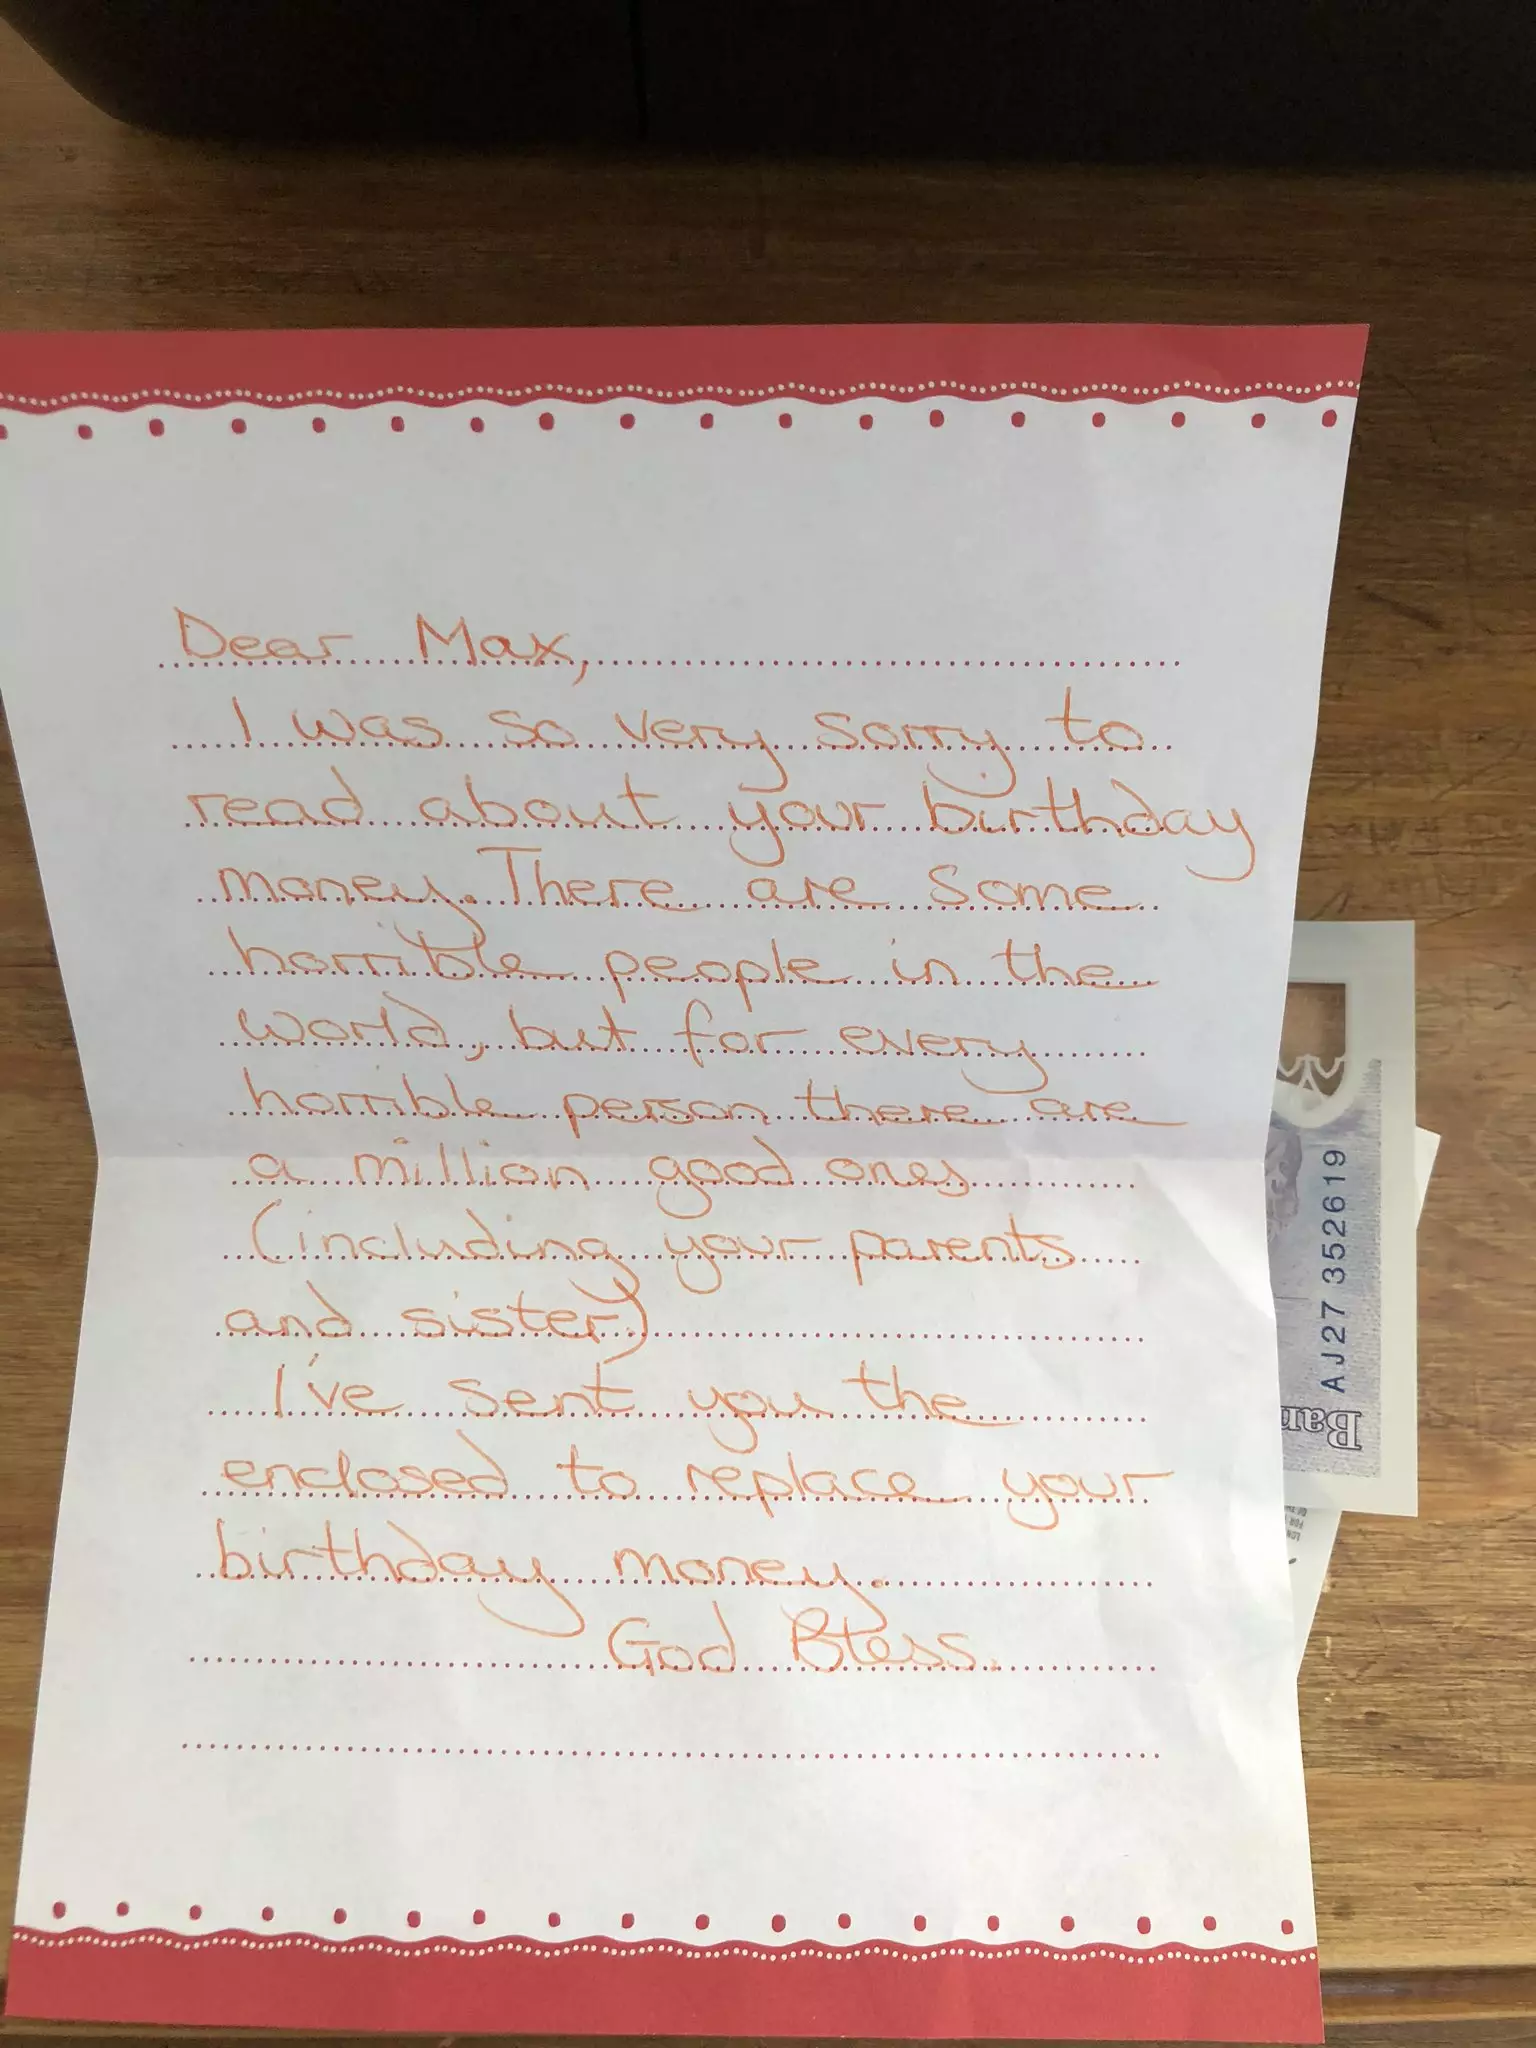 This letter was posted through the door.